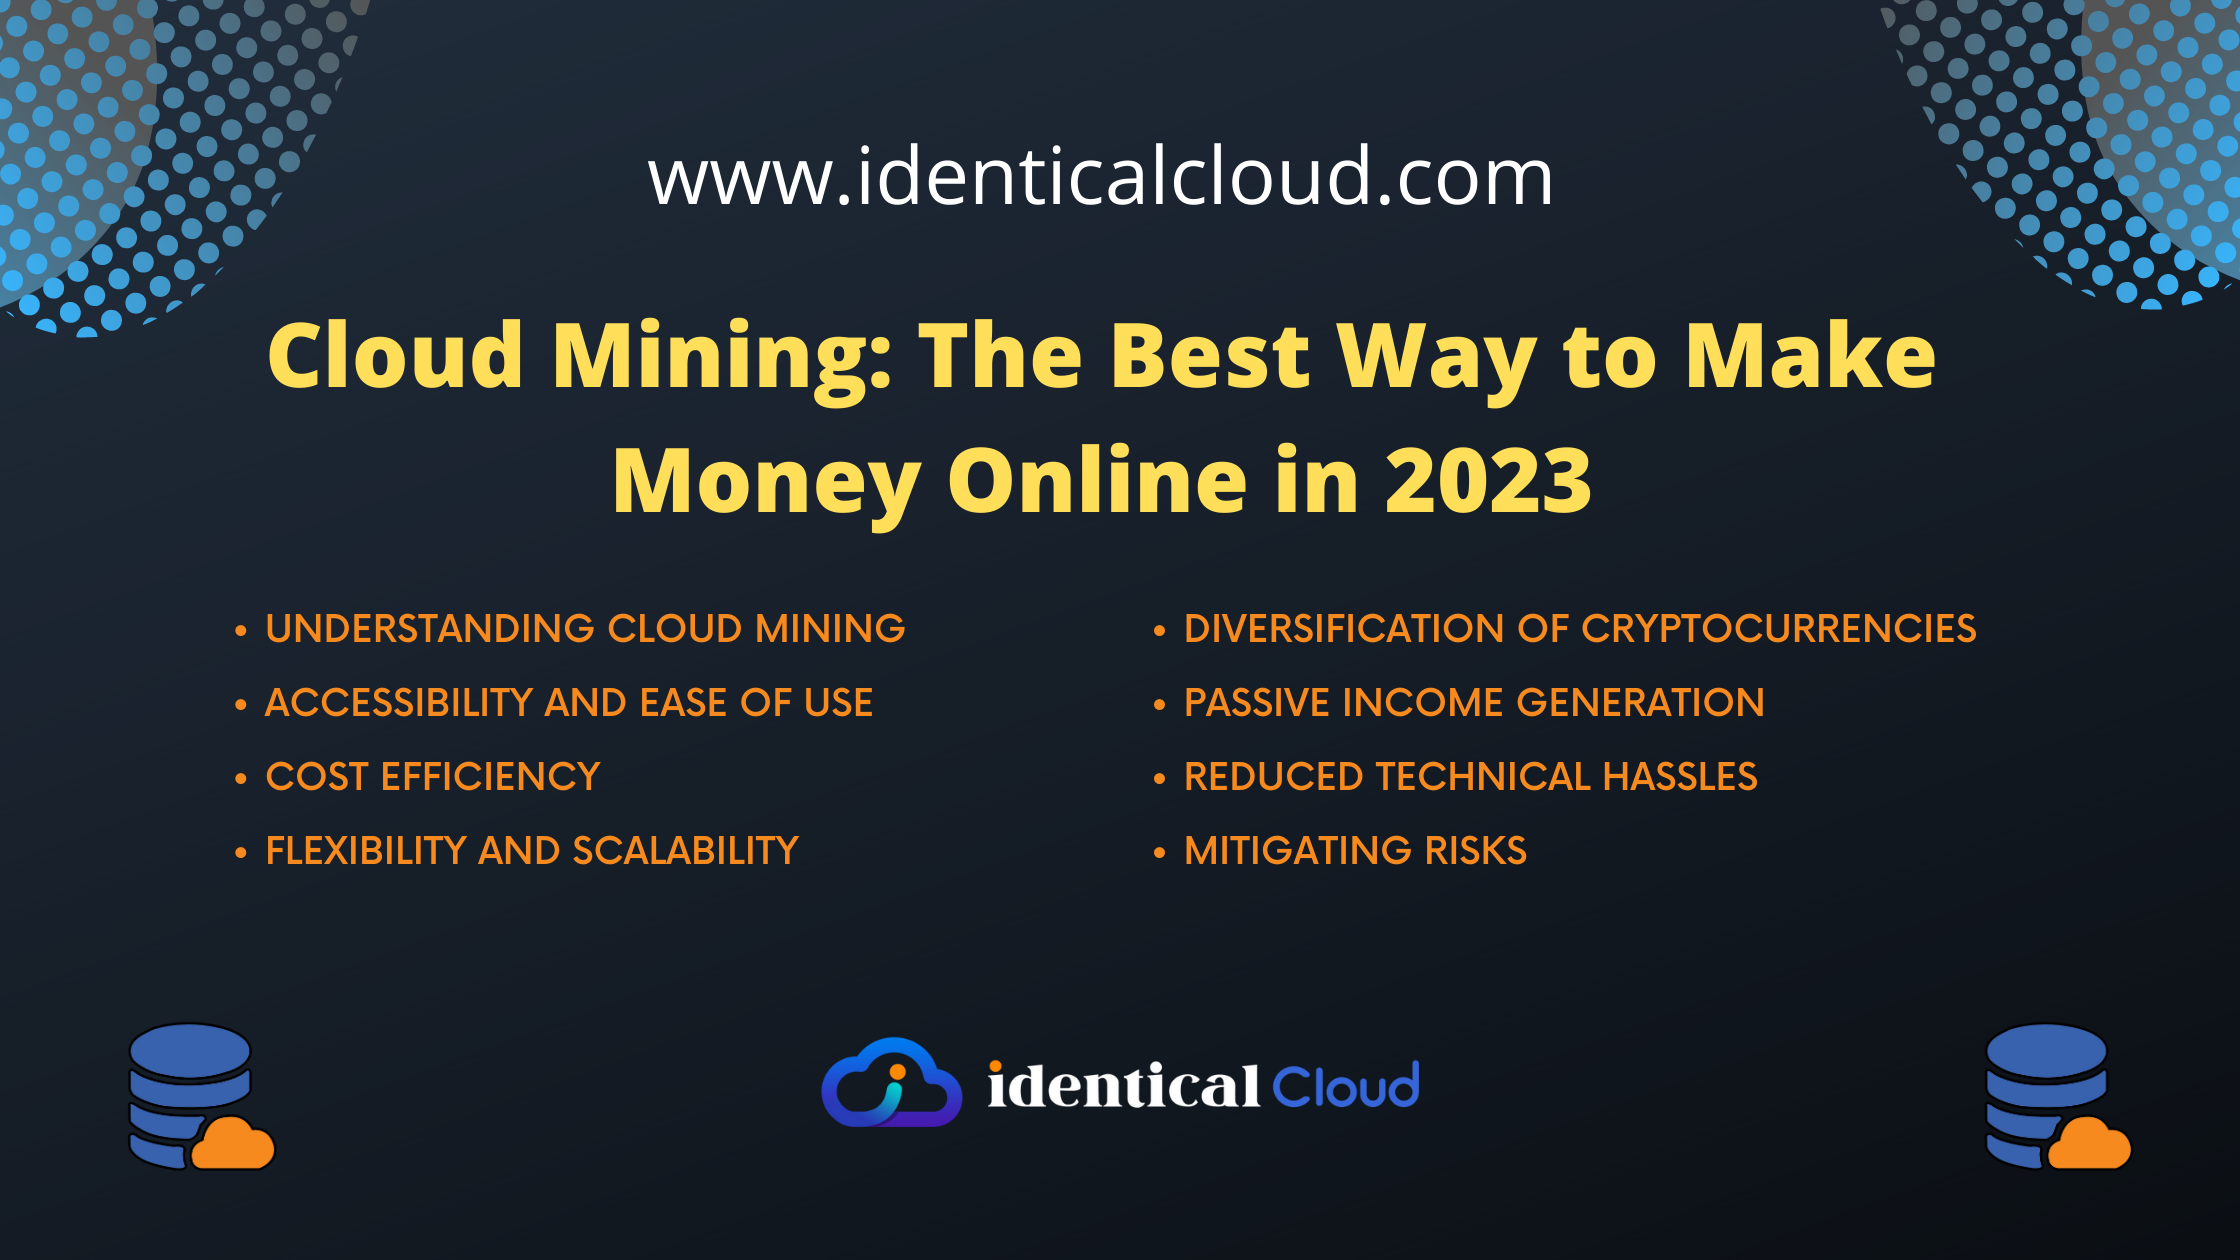 Cloud Mining: The Best Way to Make Money Online in 2023 - identicalcloud.com